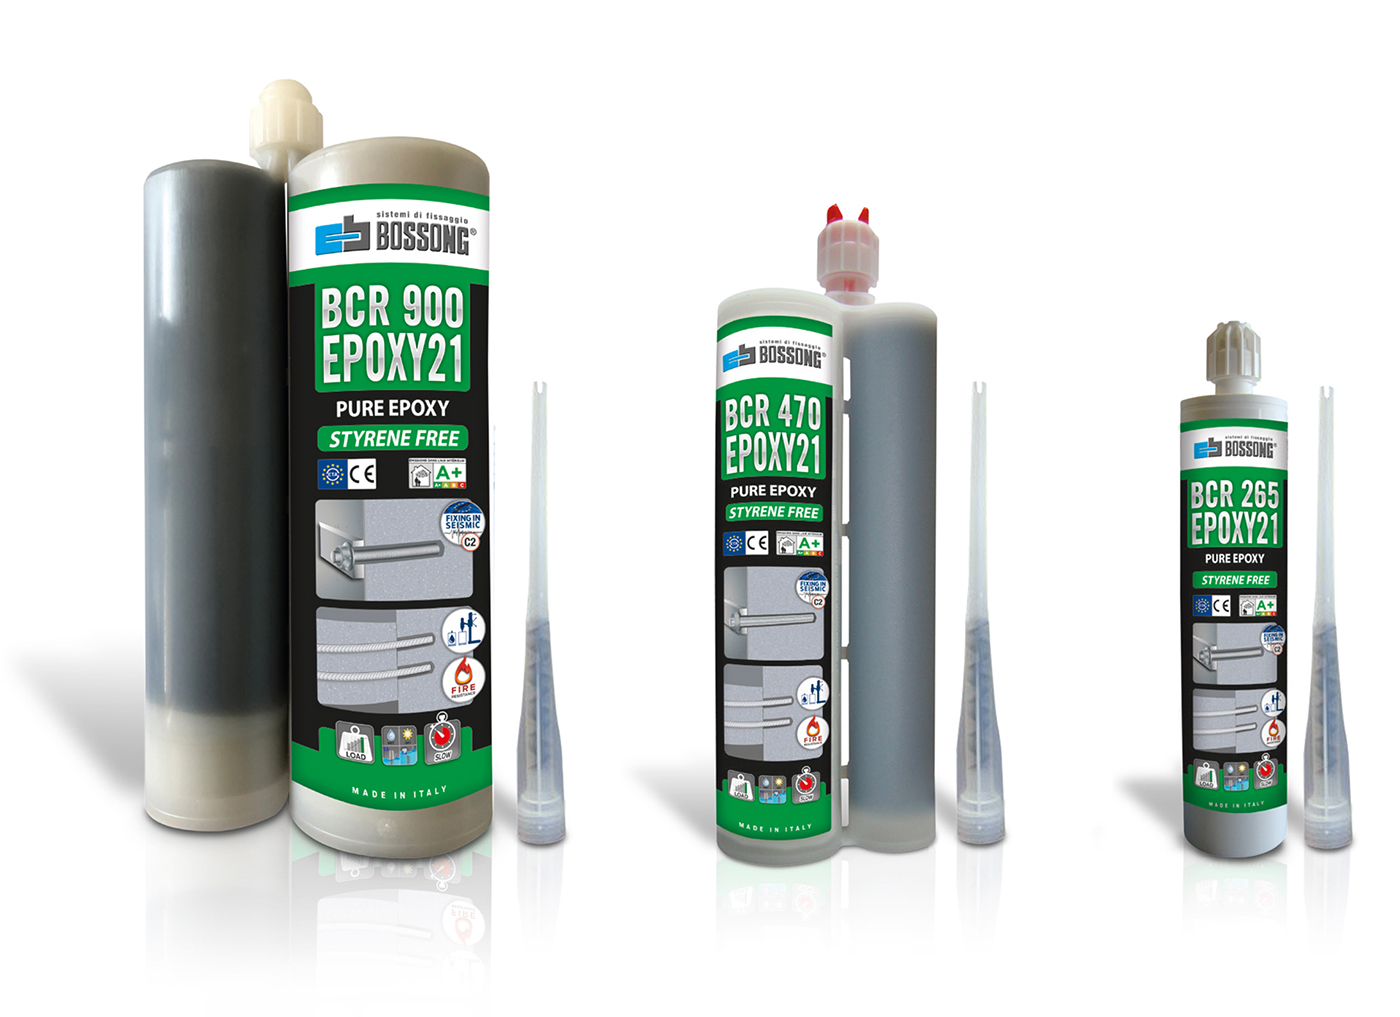 Pure and high performance seismic epoxy resin - BCR EPOXY21